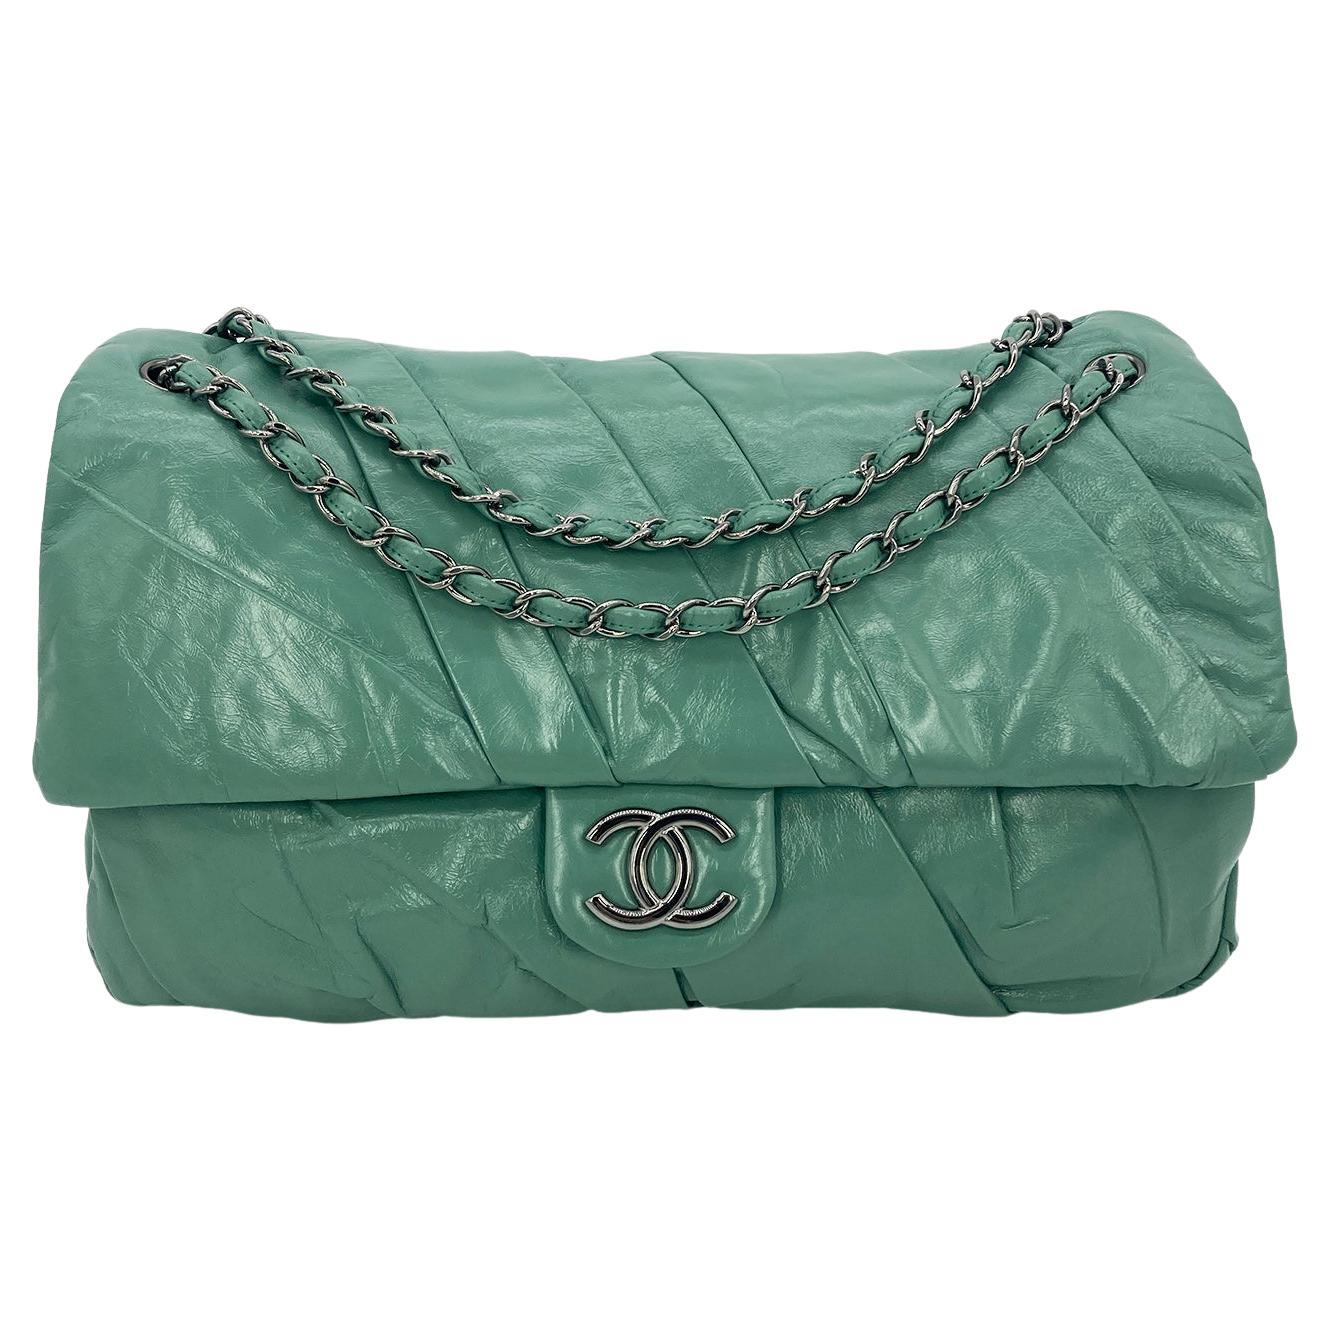 Chanel Teal Pleated Leather Soft Classic Flap